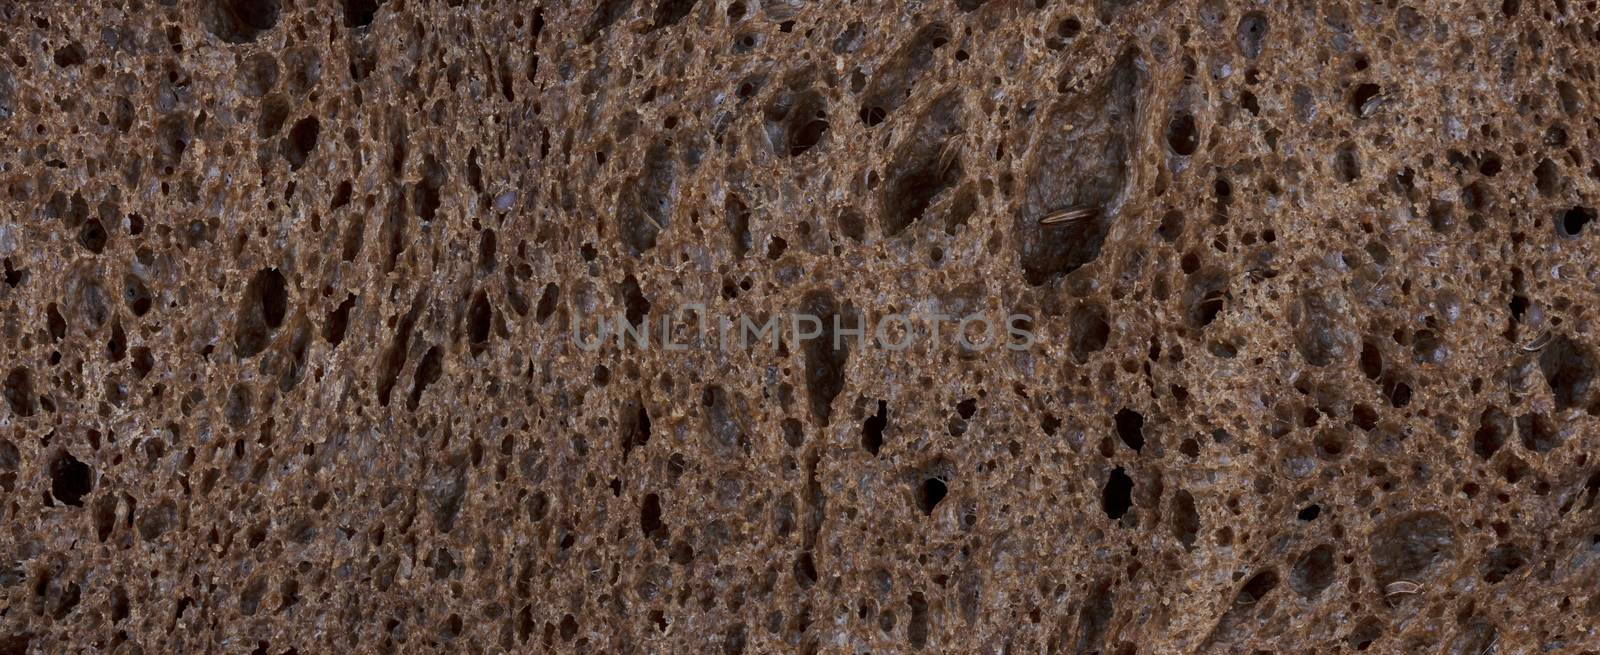 Dark healthy organic bread in filled frame format background by tab1962